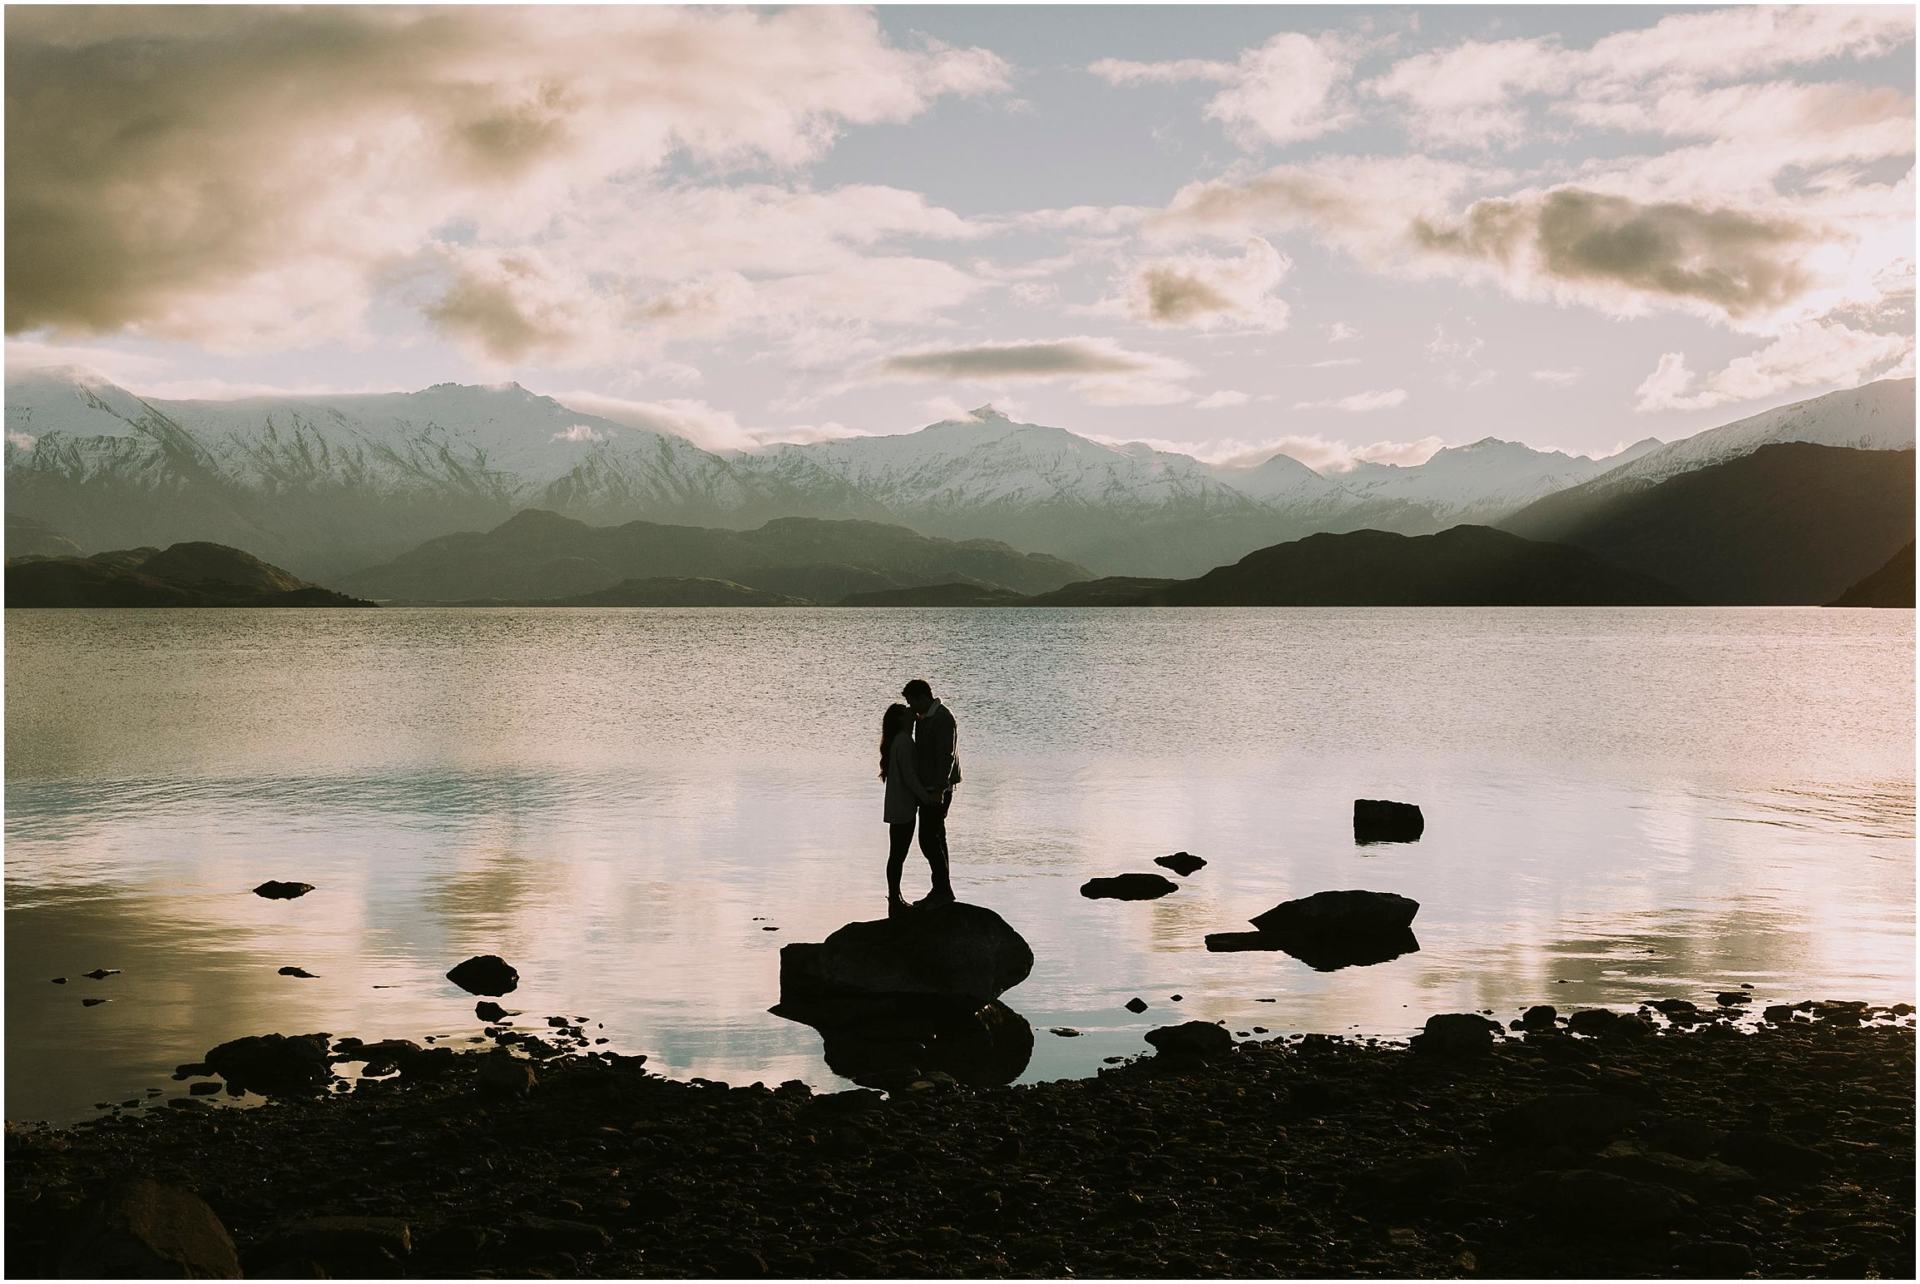 Charlotte Kiri Photography - Engagement Photography with a romantic silhouette shot of a couple standing kissing on a rock in front of a picturesque lake with snow-capped mountains behind in Wanaka, New Zealand